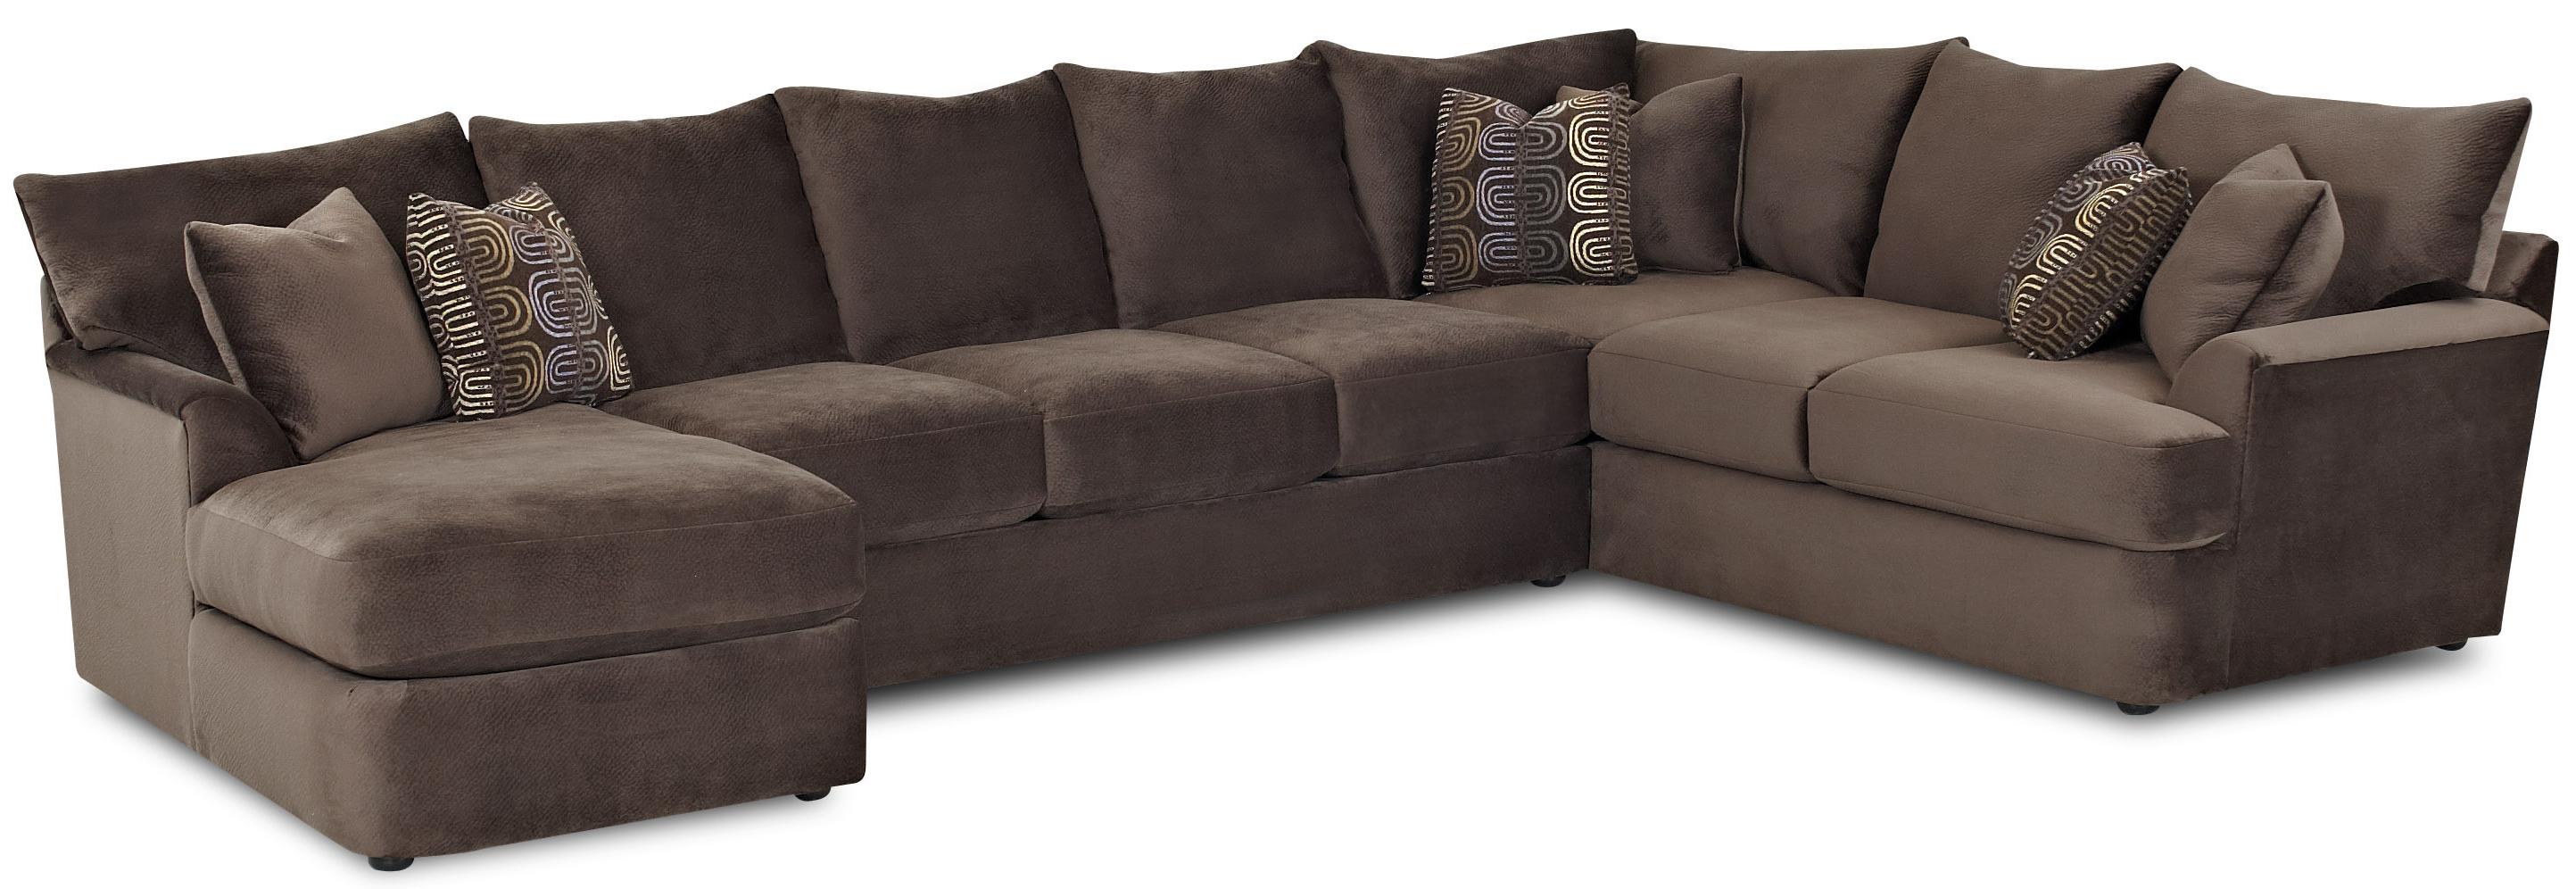 l shaped couch klaussner findley sectional - item number: k56830l chase+as+r crns FPFUXGR